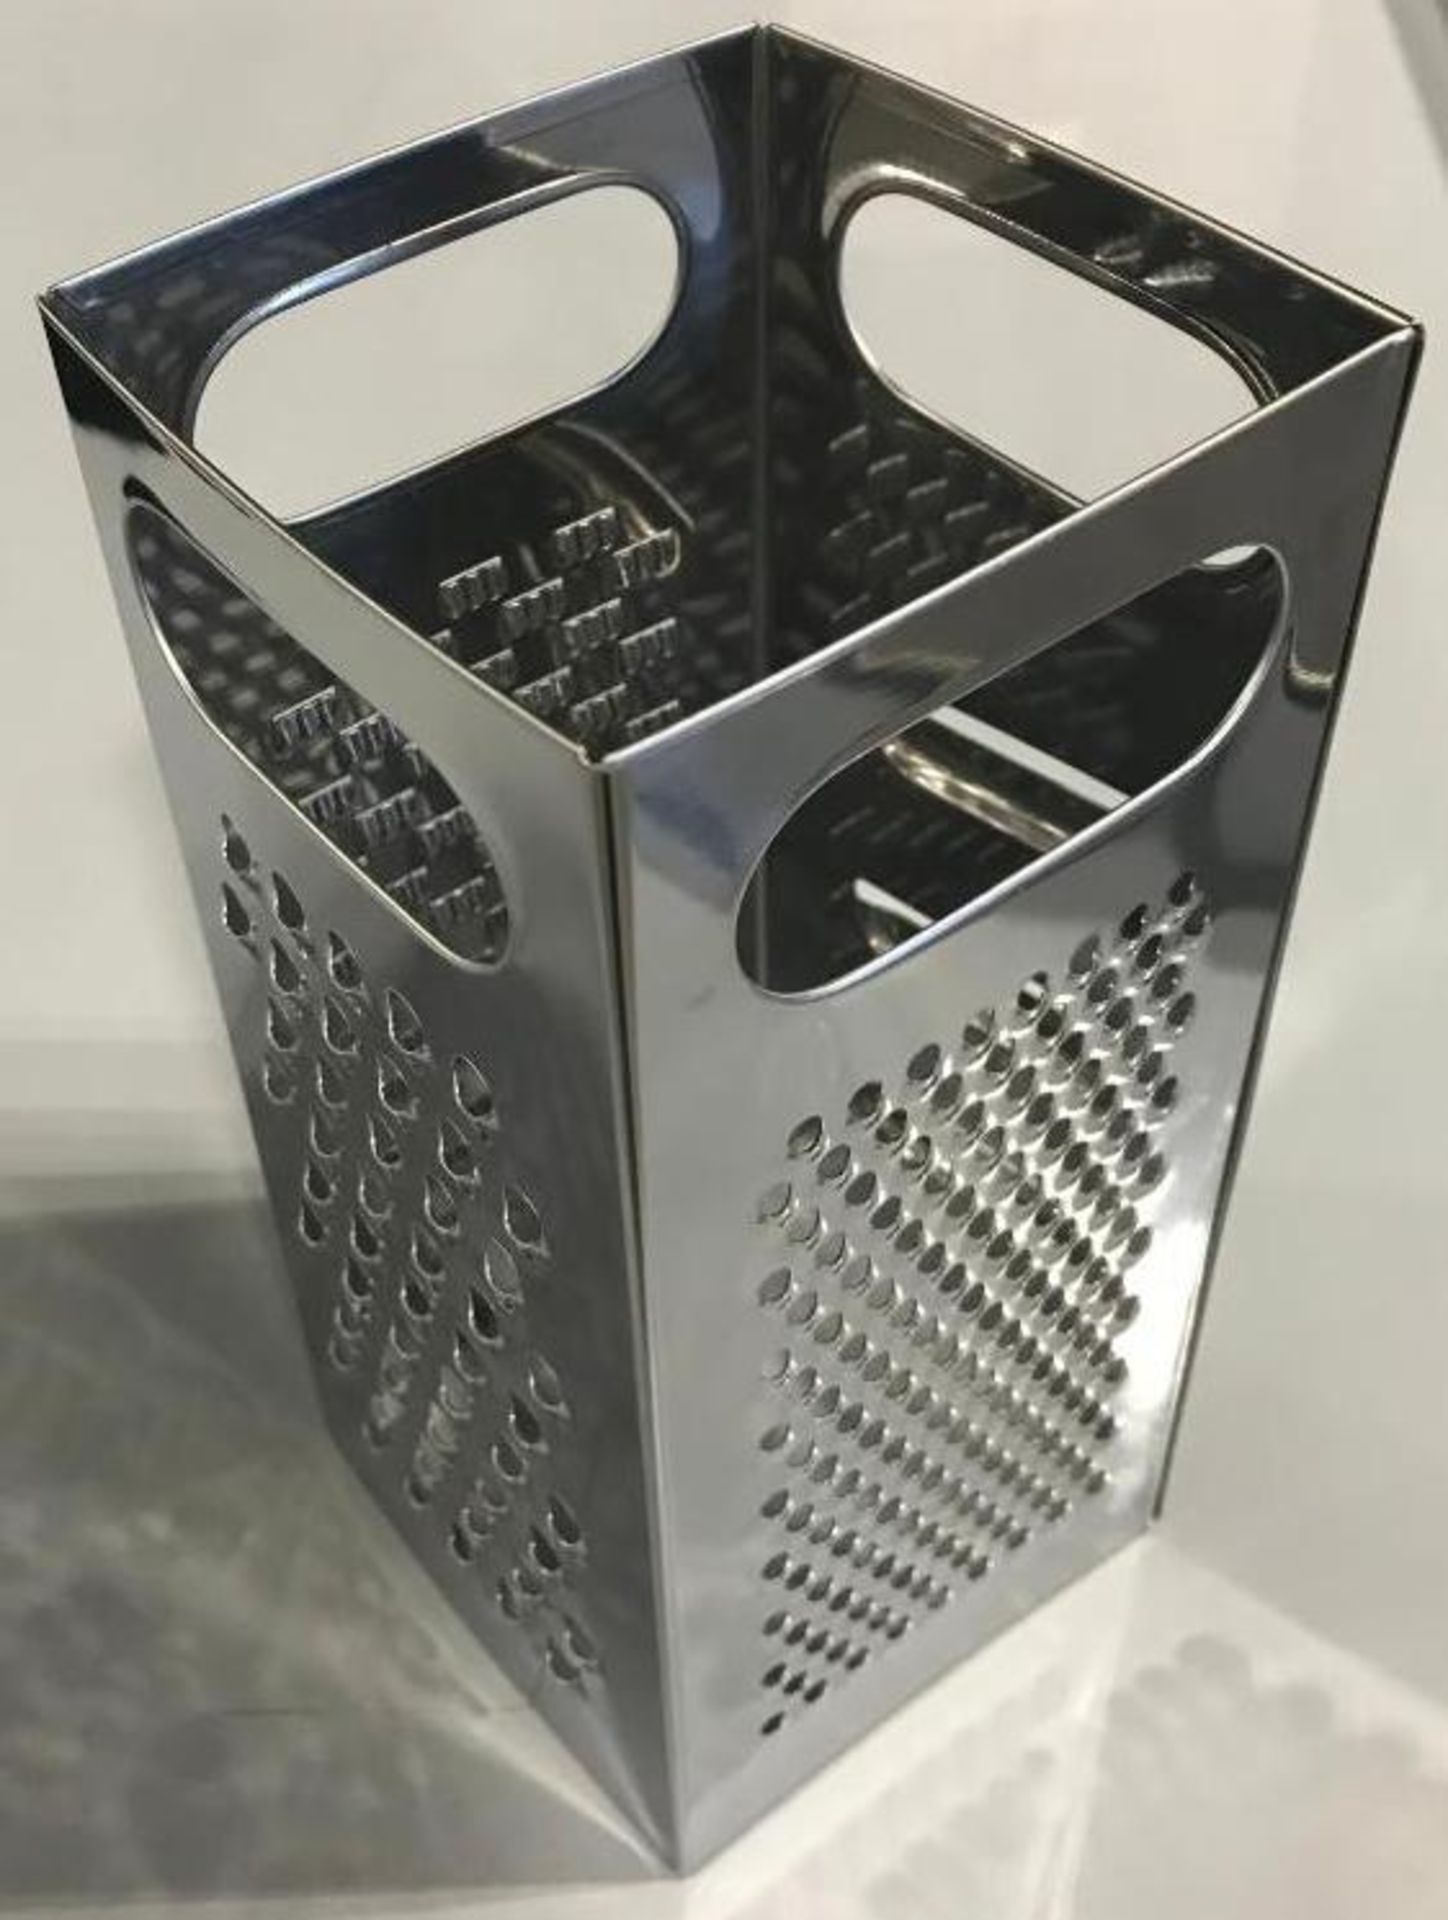 UPDATE INTERNATIONAL FOUR SIDED STAINLESS GRATER, GR-449 - NEW